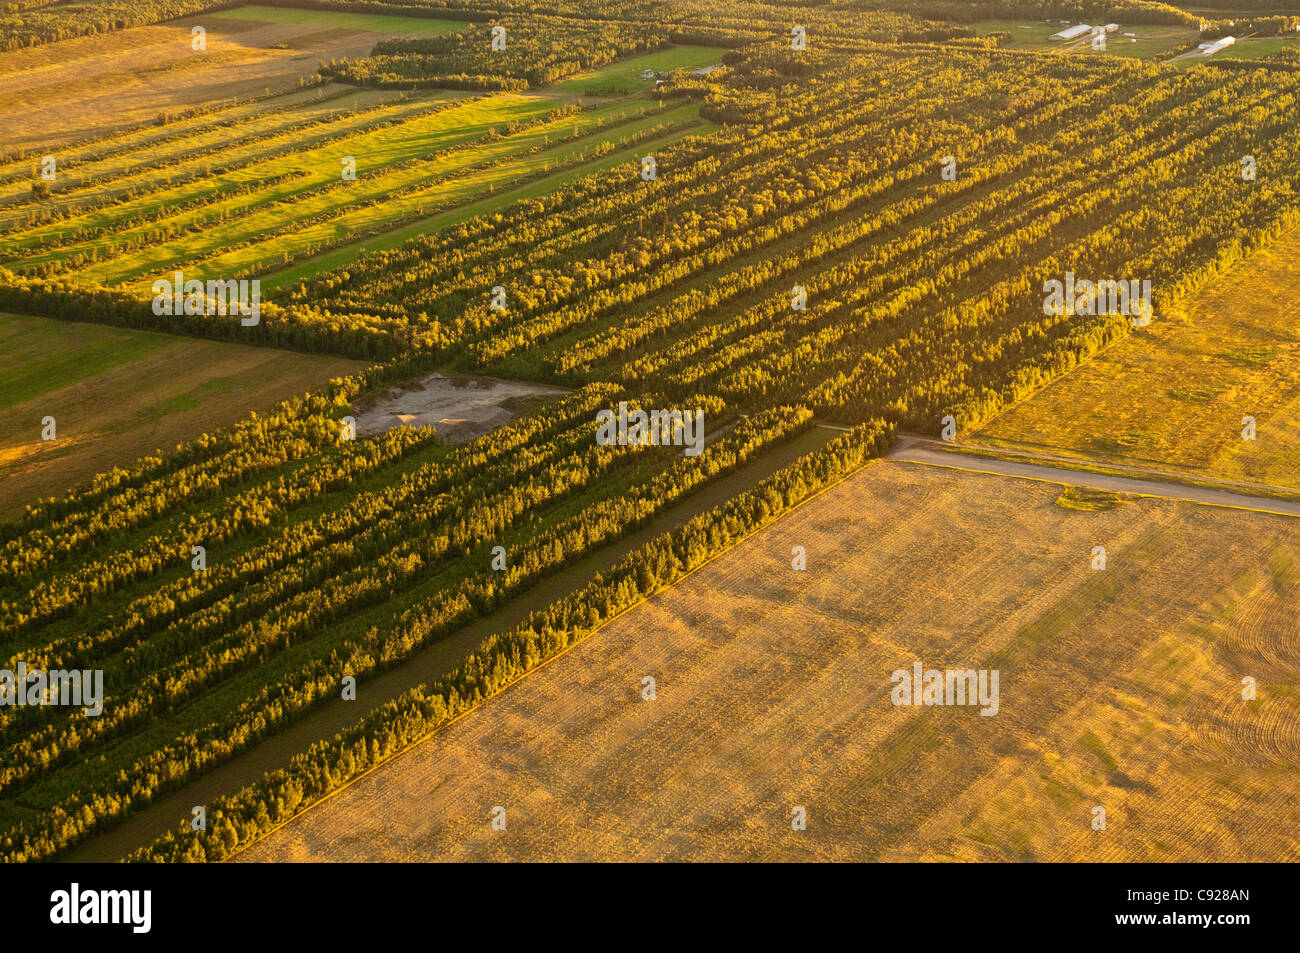 Aerial view of agricultural land in the Matanuska-Susitna Valley near Point MacKenzie, Southcentral Alaska, Autumn Stock Photo